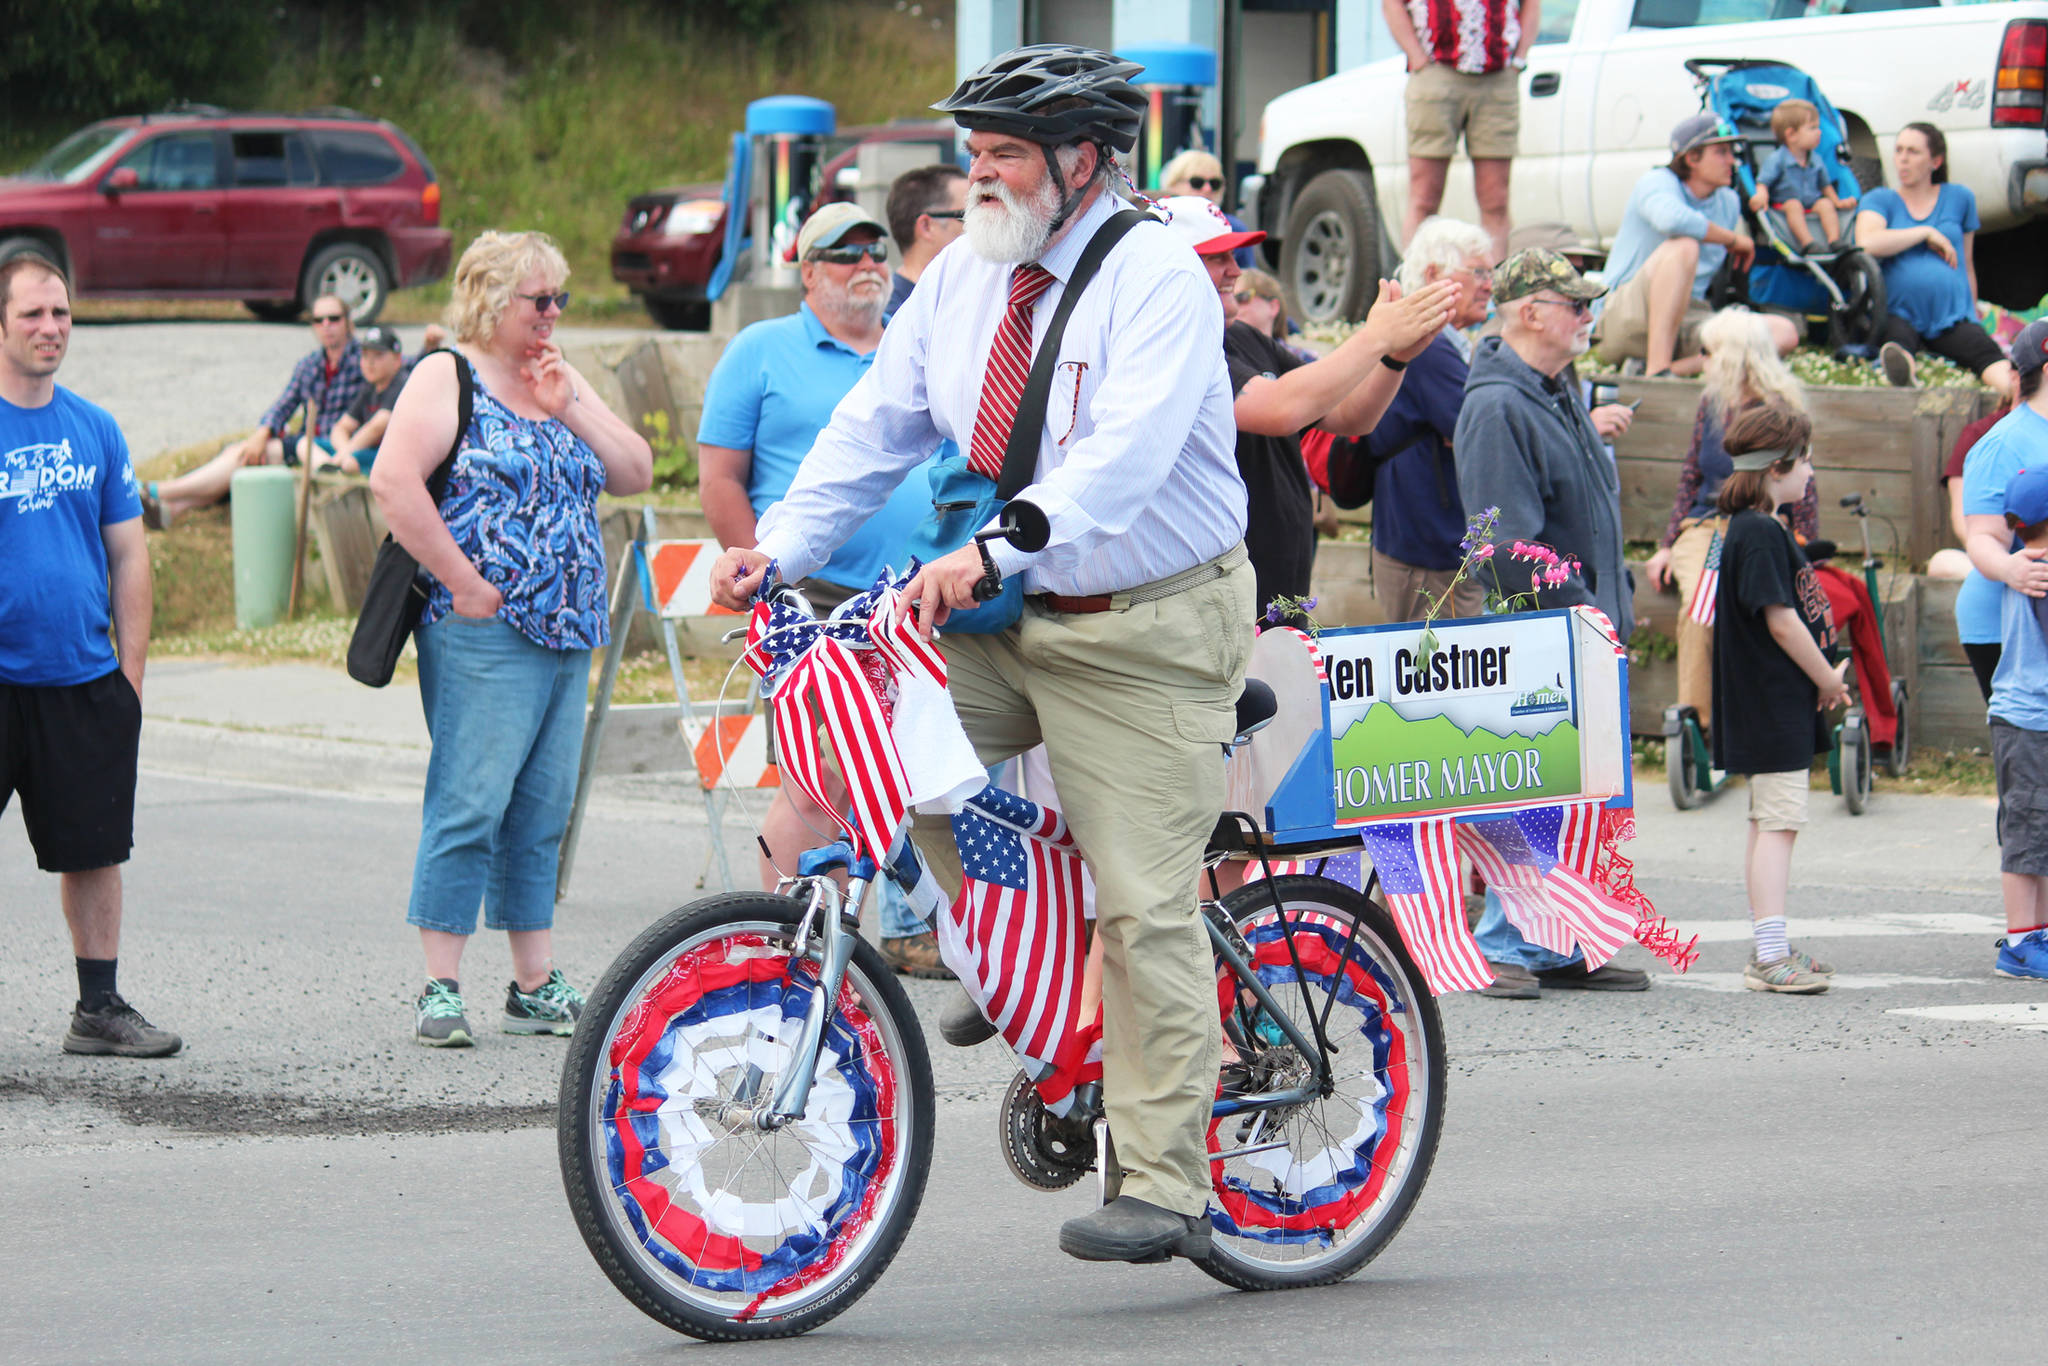 Homer Mayor Ken Castner cycles down Pioneer Avenue during this year’s July Fourth parade, hosted by the Homer Chamber of Commerce, on Thursday, July 4, 2019 in Homer, Alaska. (Photo by Megan Pacer/Homer News)